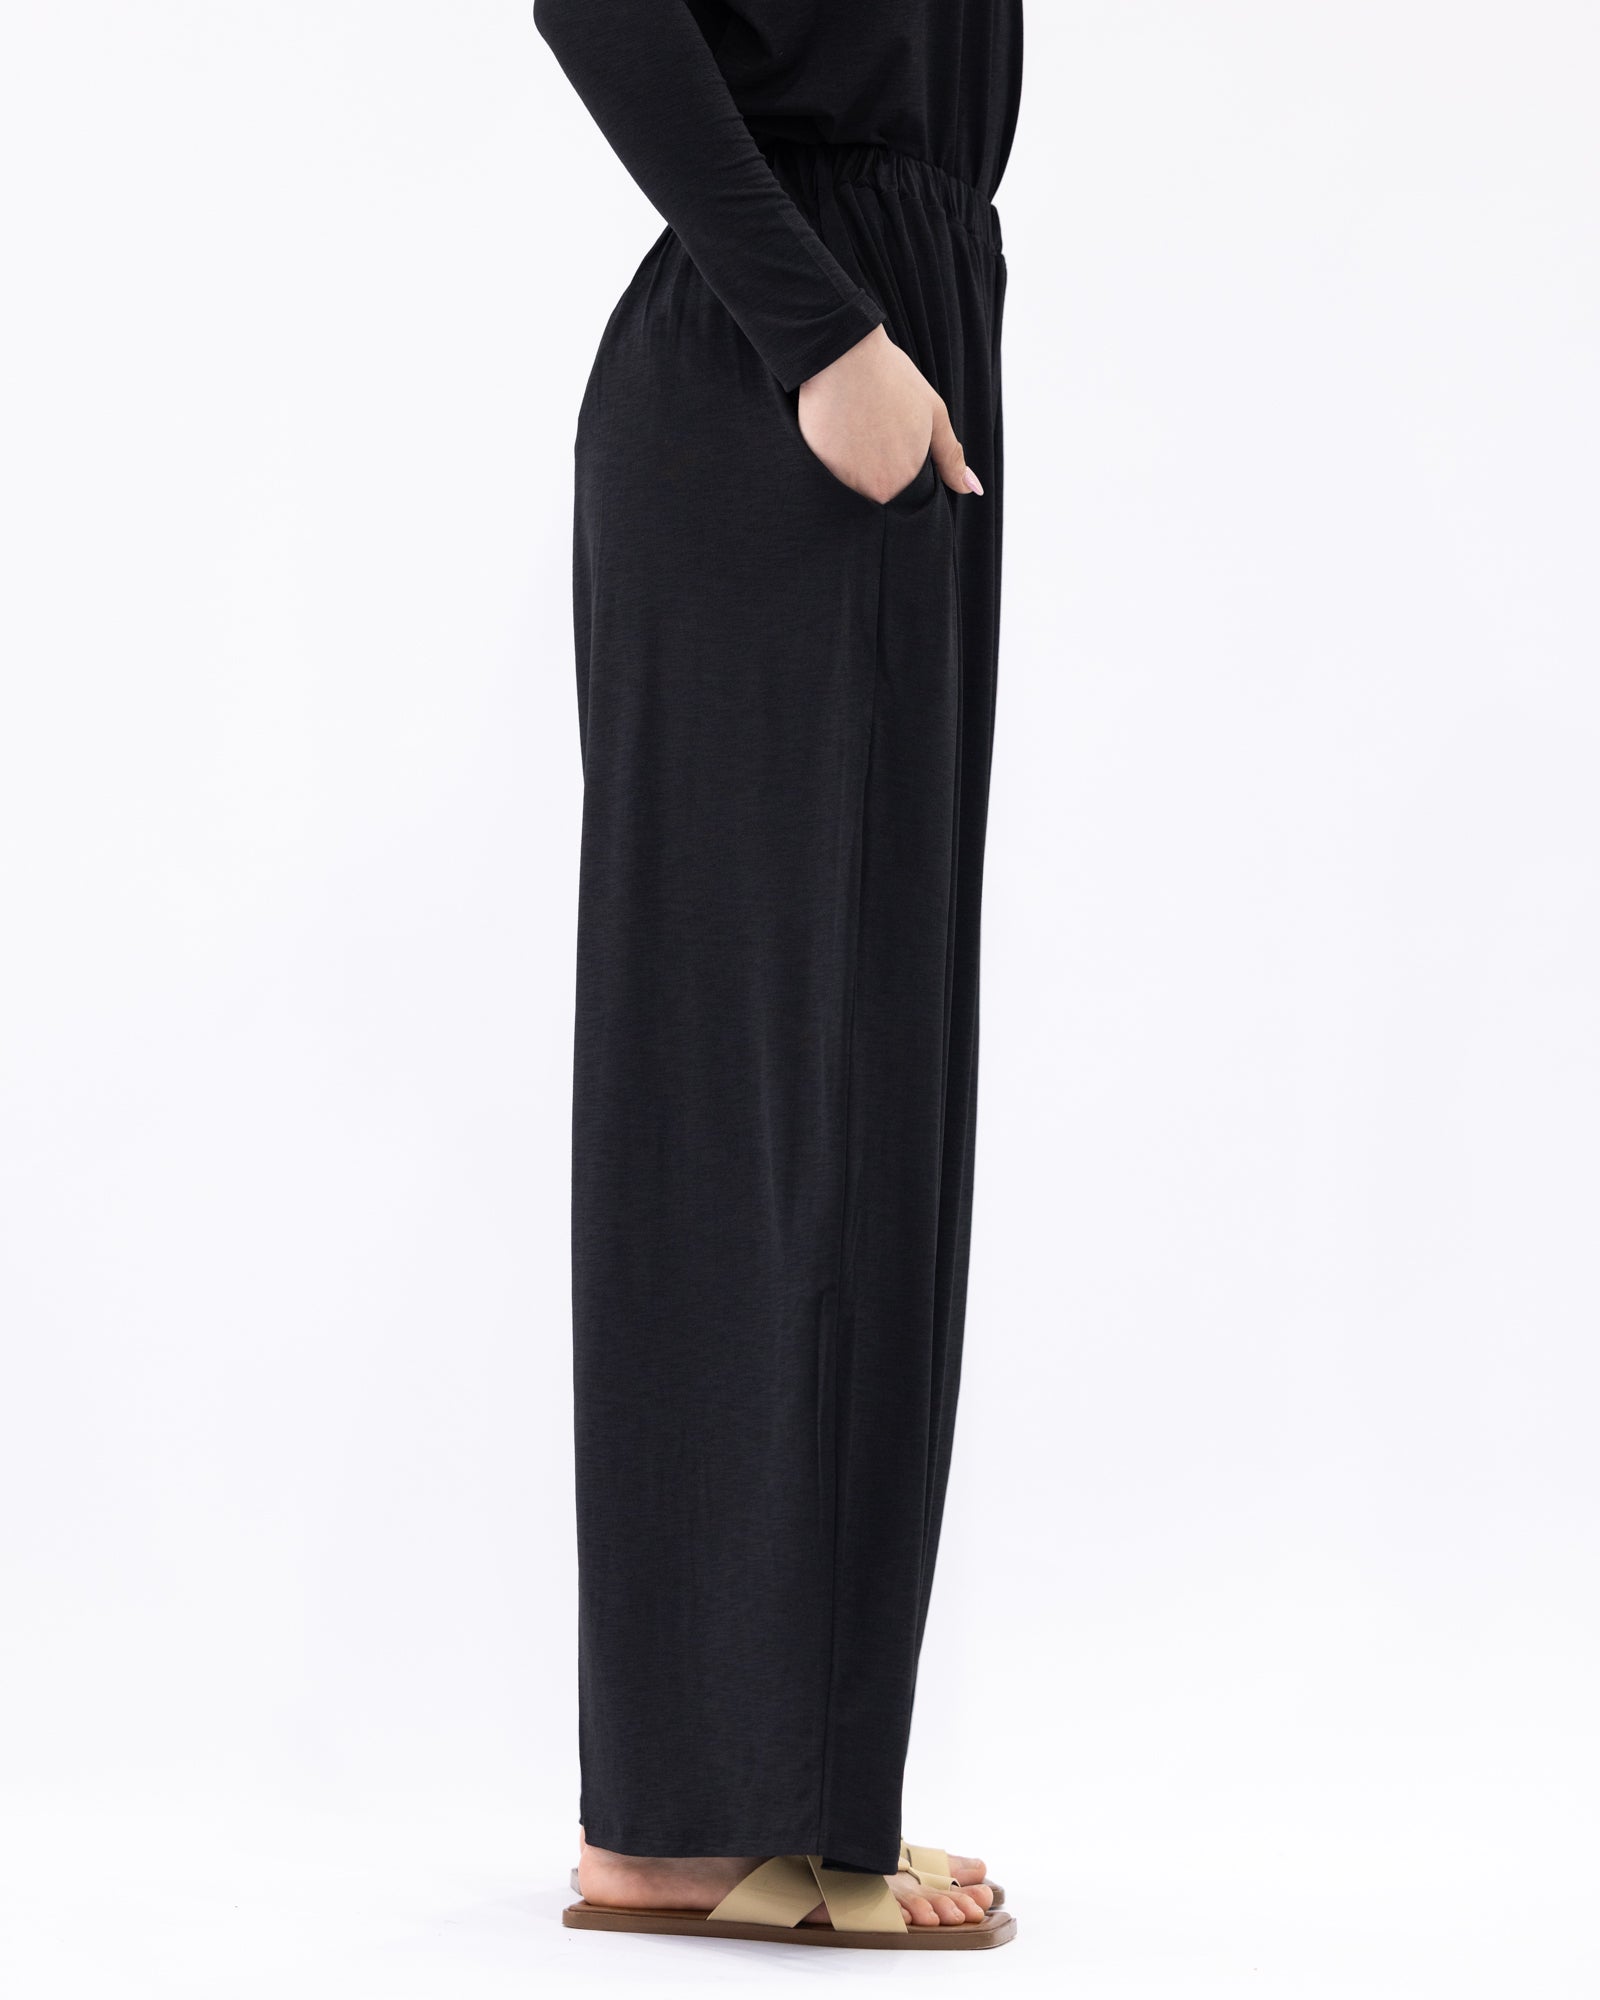 Lux Palazzo Pants Black (pre order arrival Oct 10th)